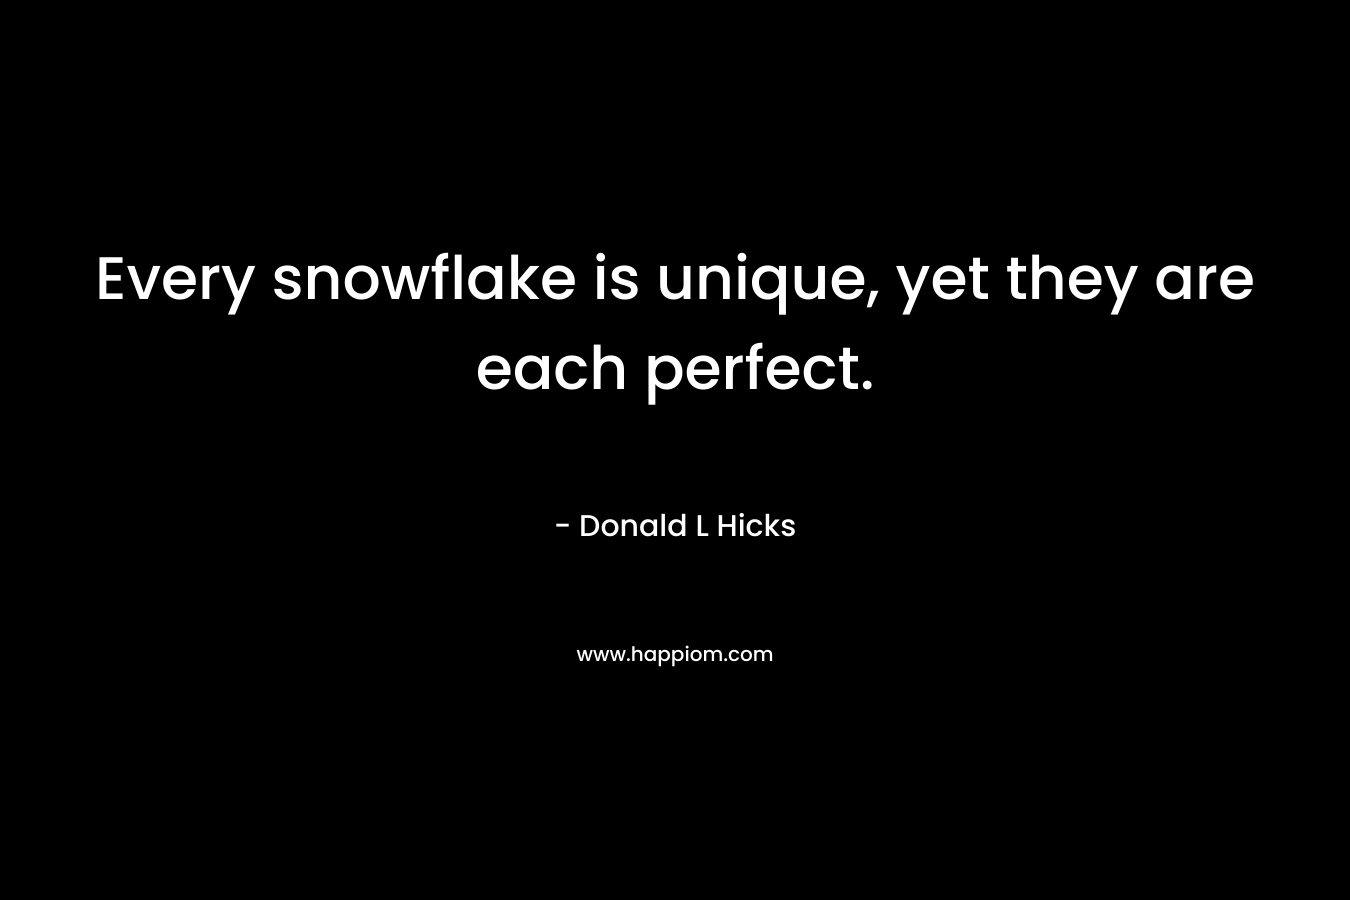 Every snowflake is unique, yet they are each perfect. – Donald L Hicks